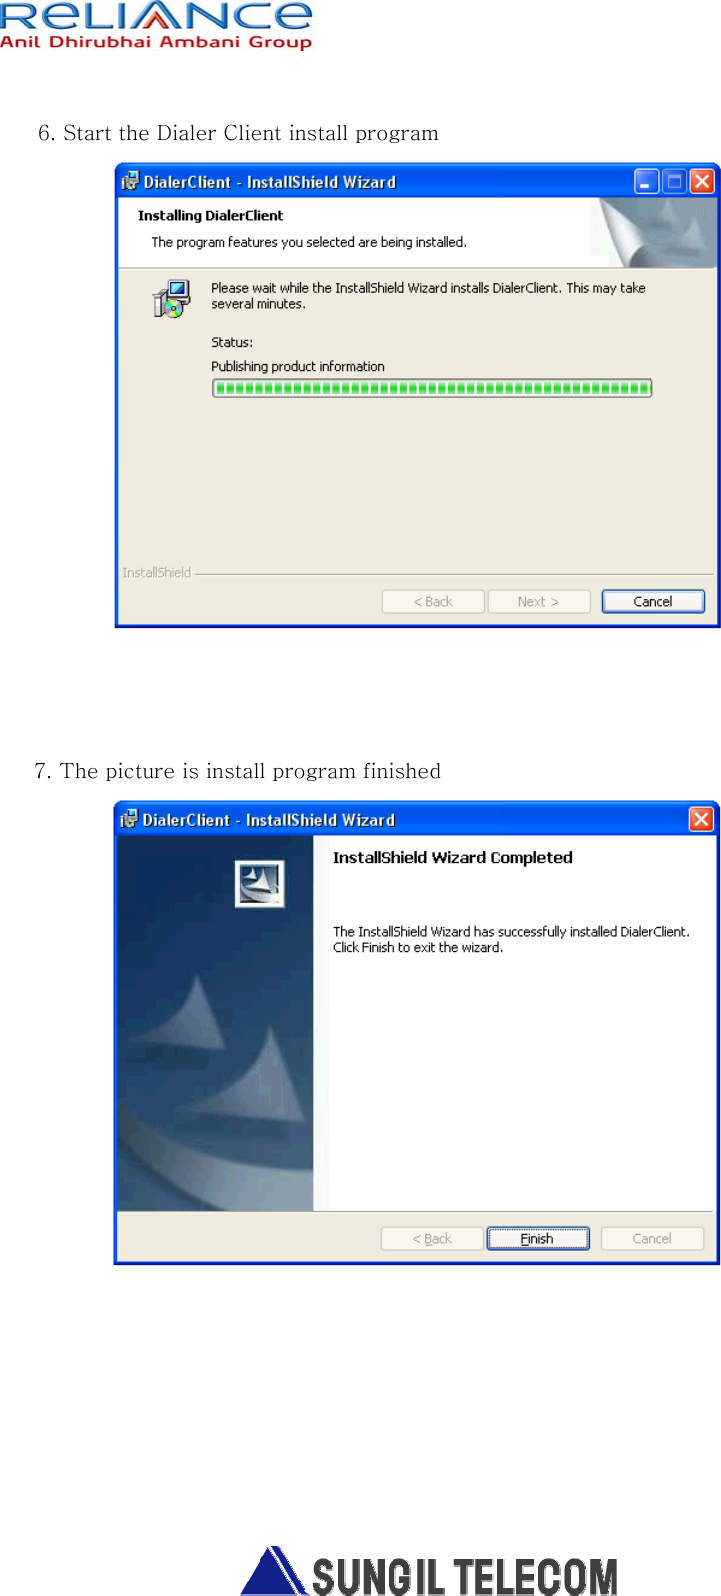   6. Start the Dialer Client install program     7. The picture is install program finished       